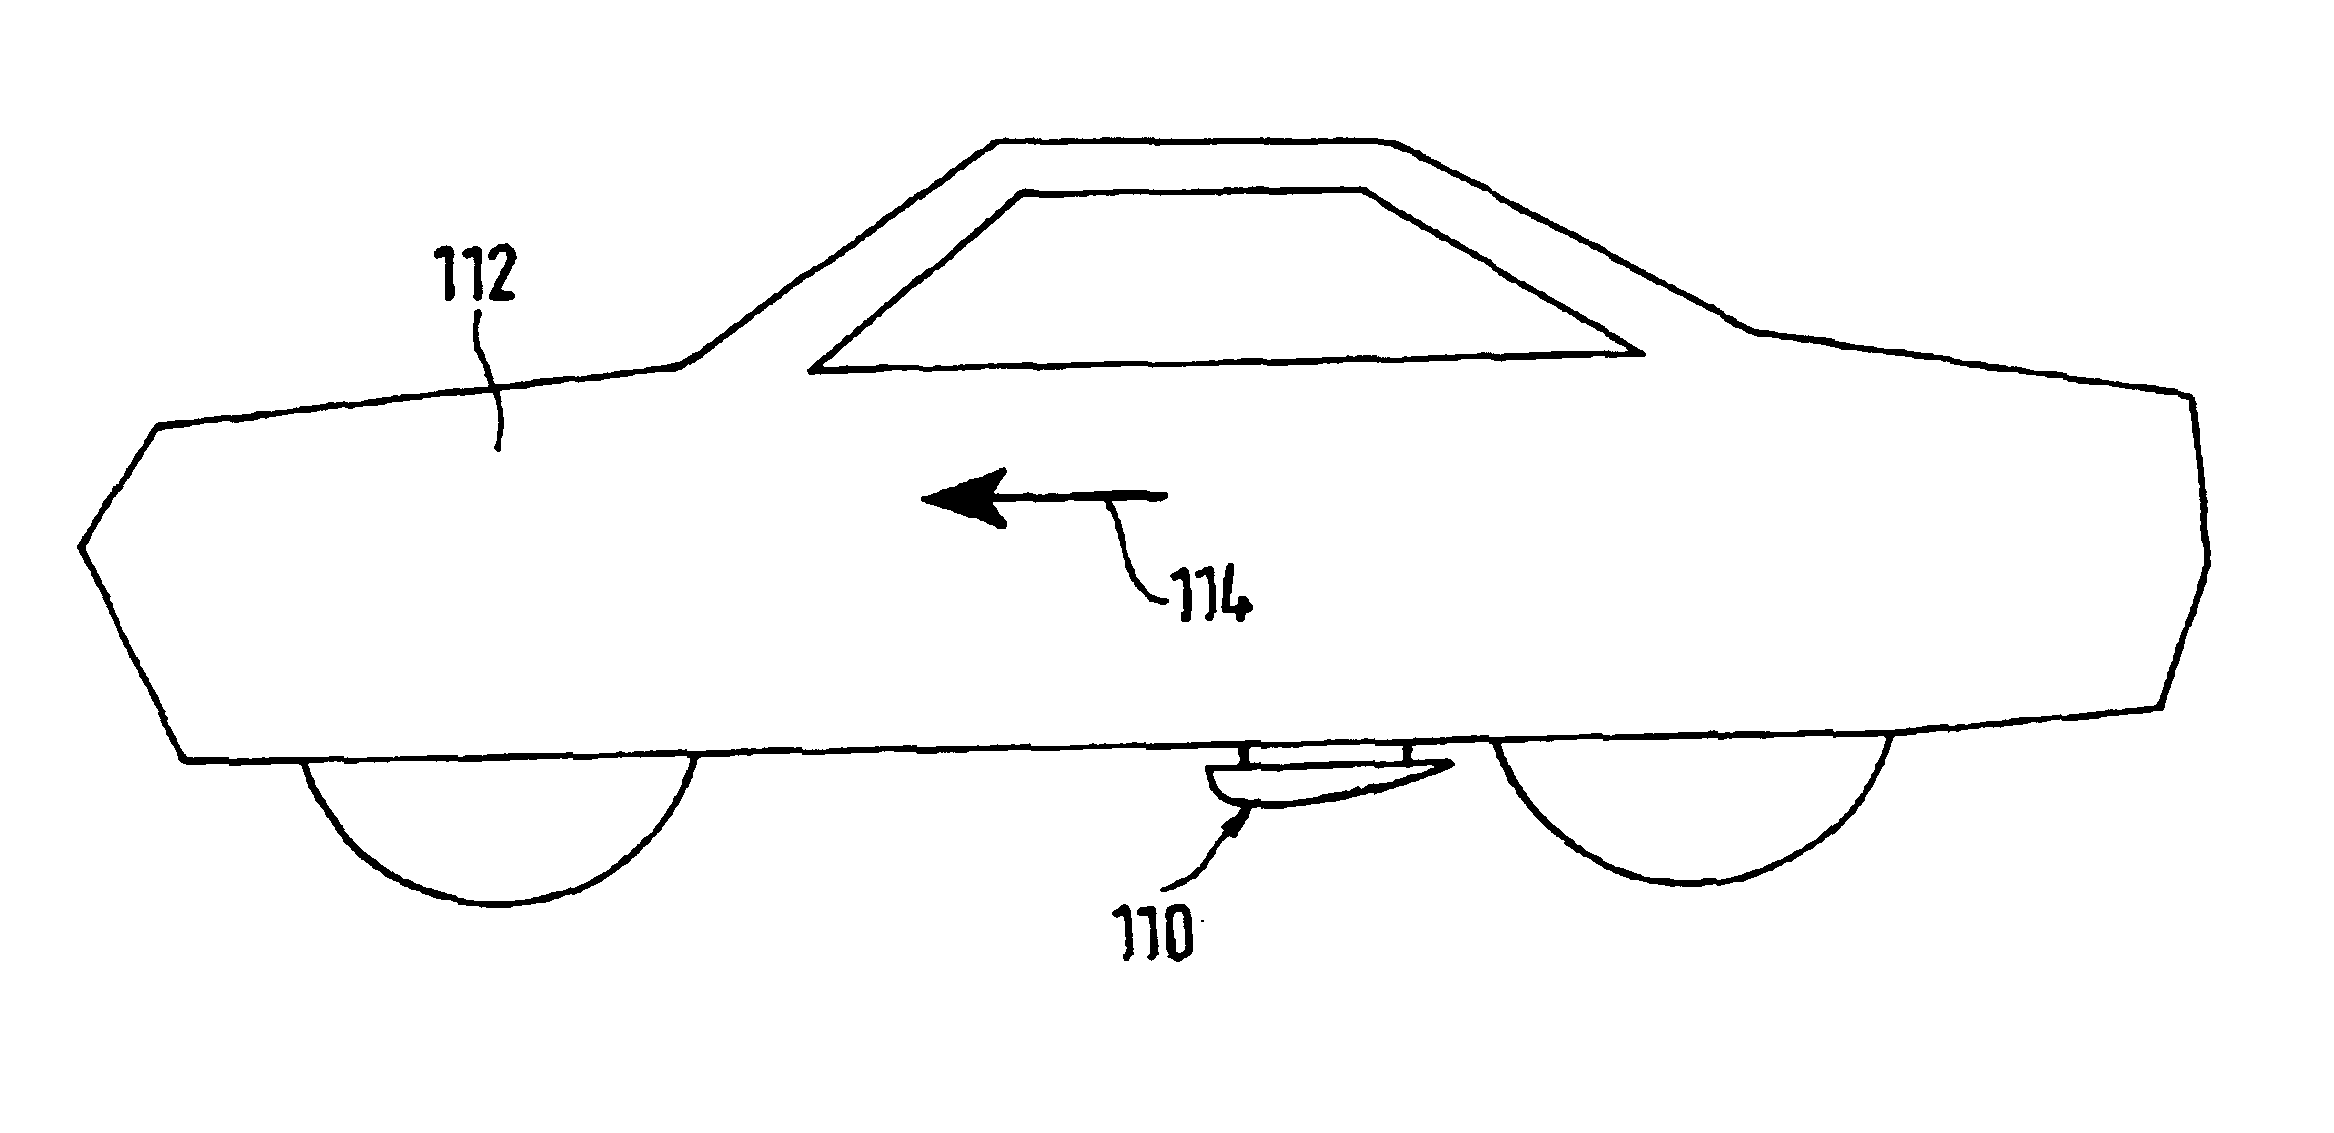 Skin for a motor vehicle